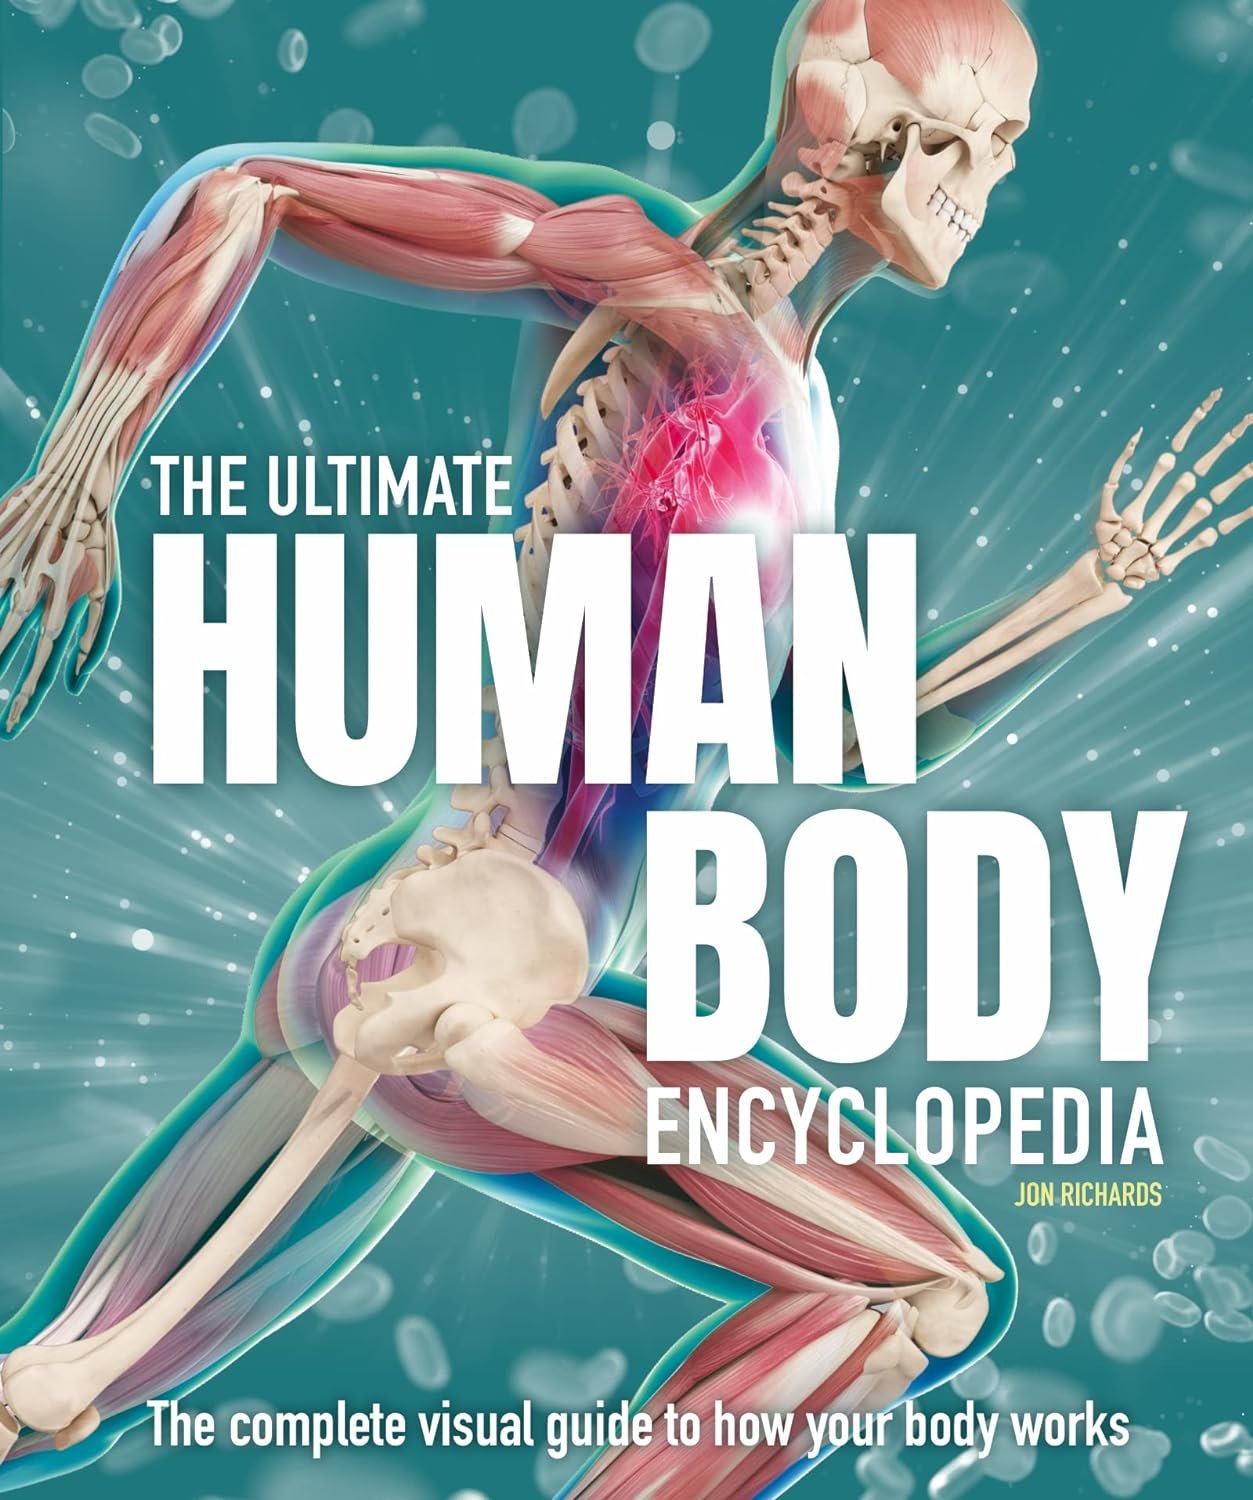 The Ultimate Human Body Encyclopedia: The complete visual guide